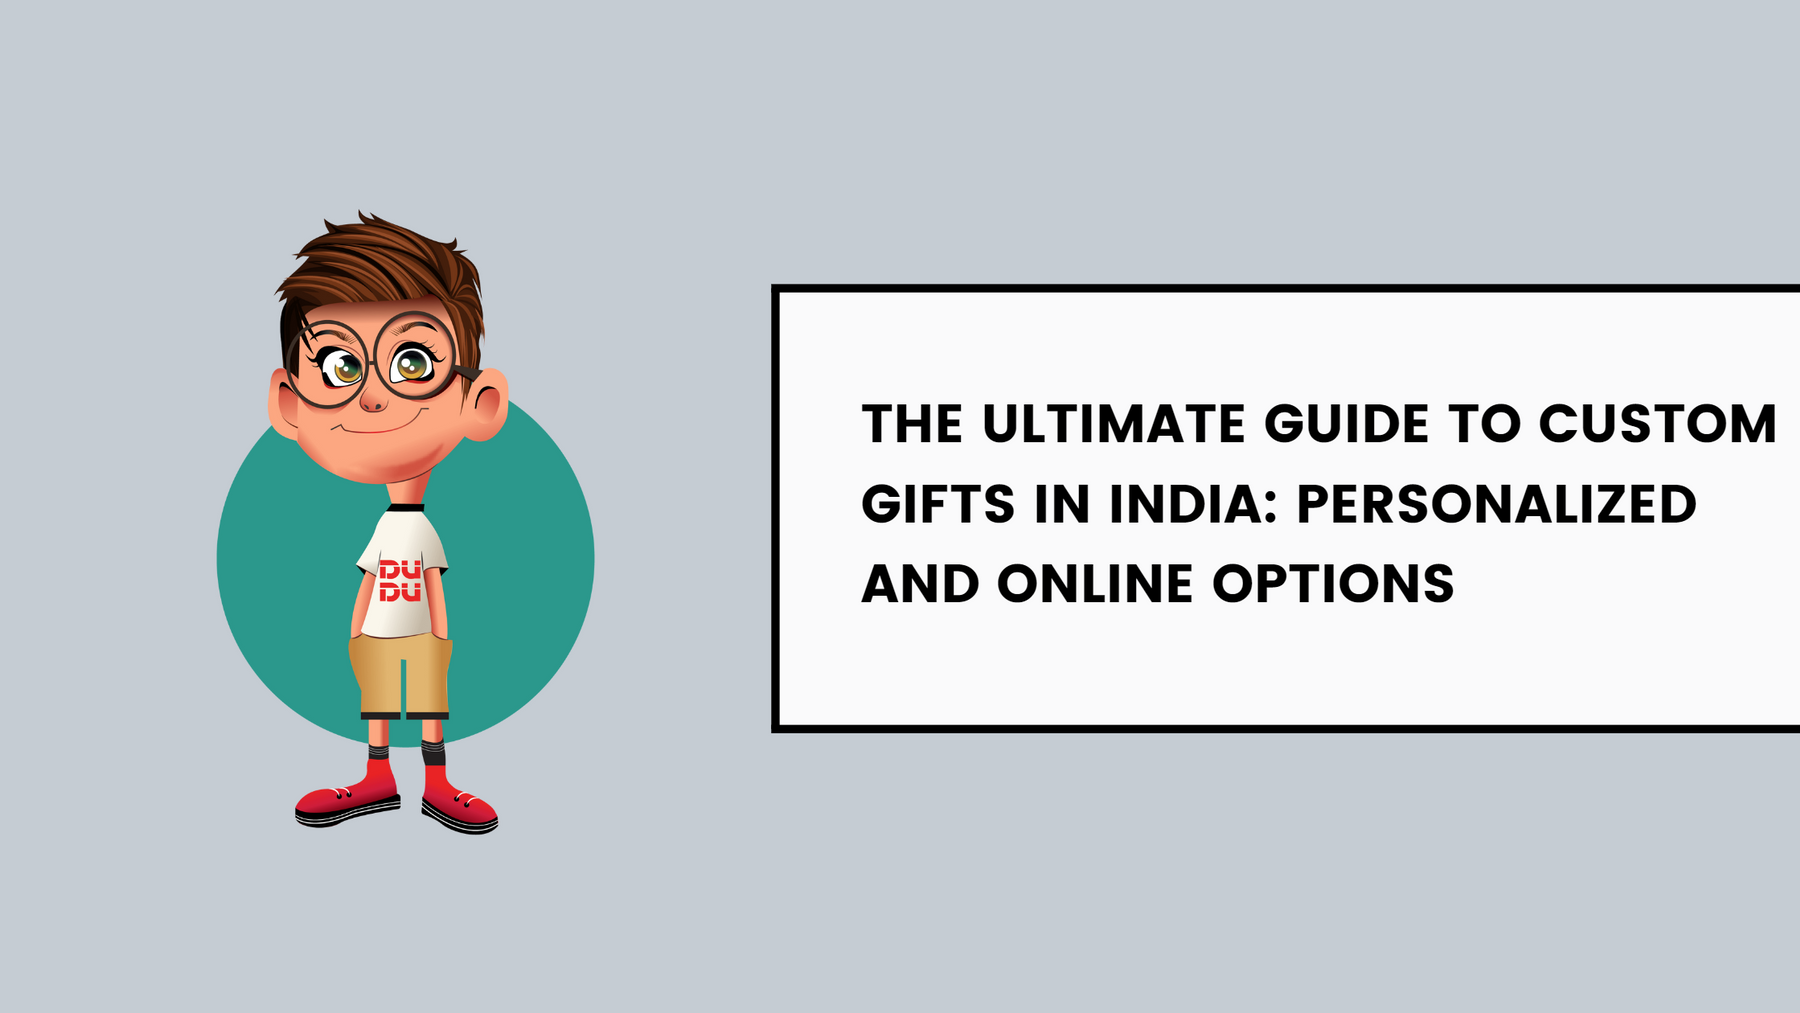 The Ultimate Guide to Custom Gifts in India: Personalized and Online Options